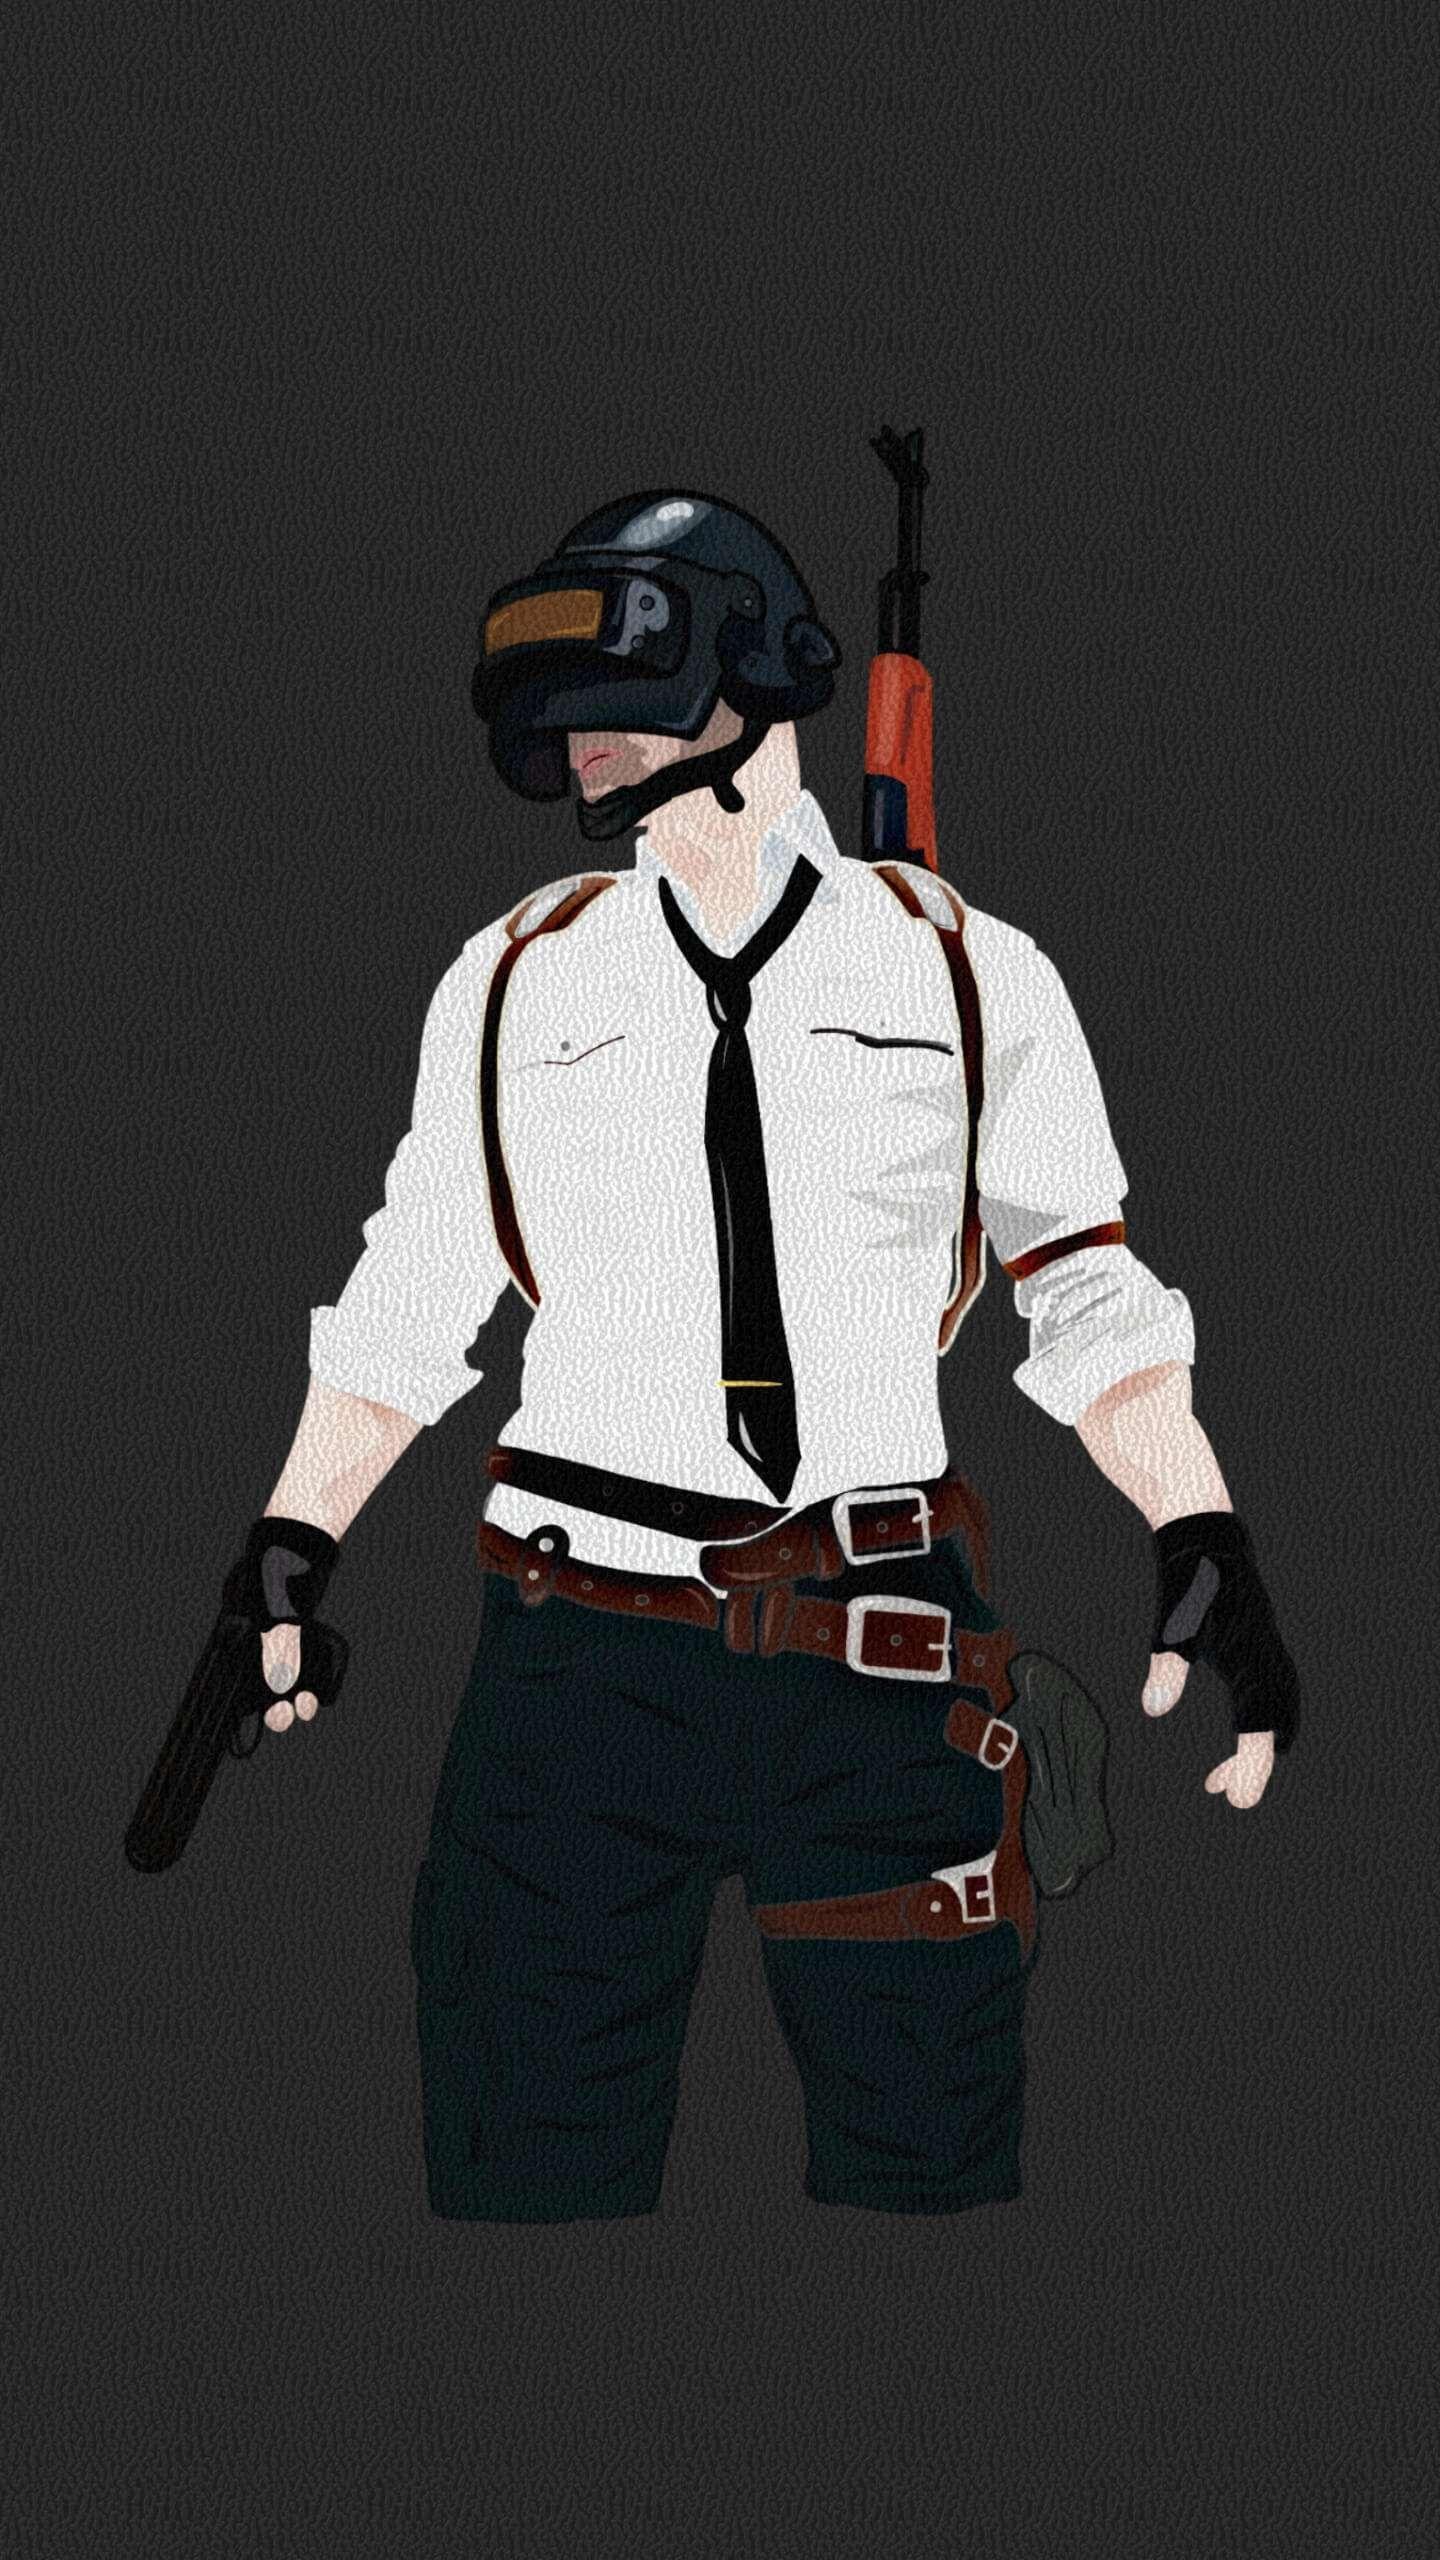 PUBG Level 3 iPhone Wallpaper. Android phone wallpaper